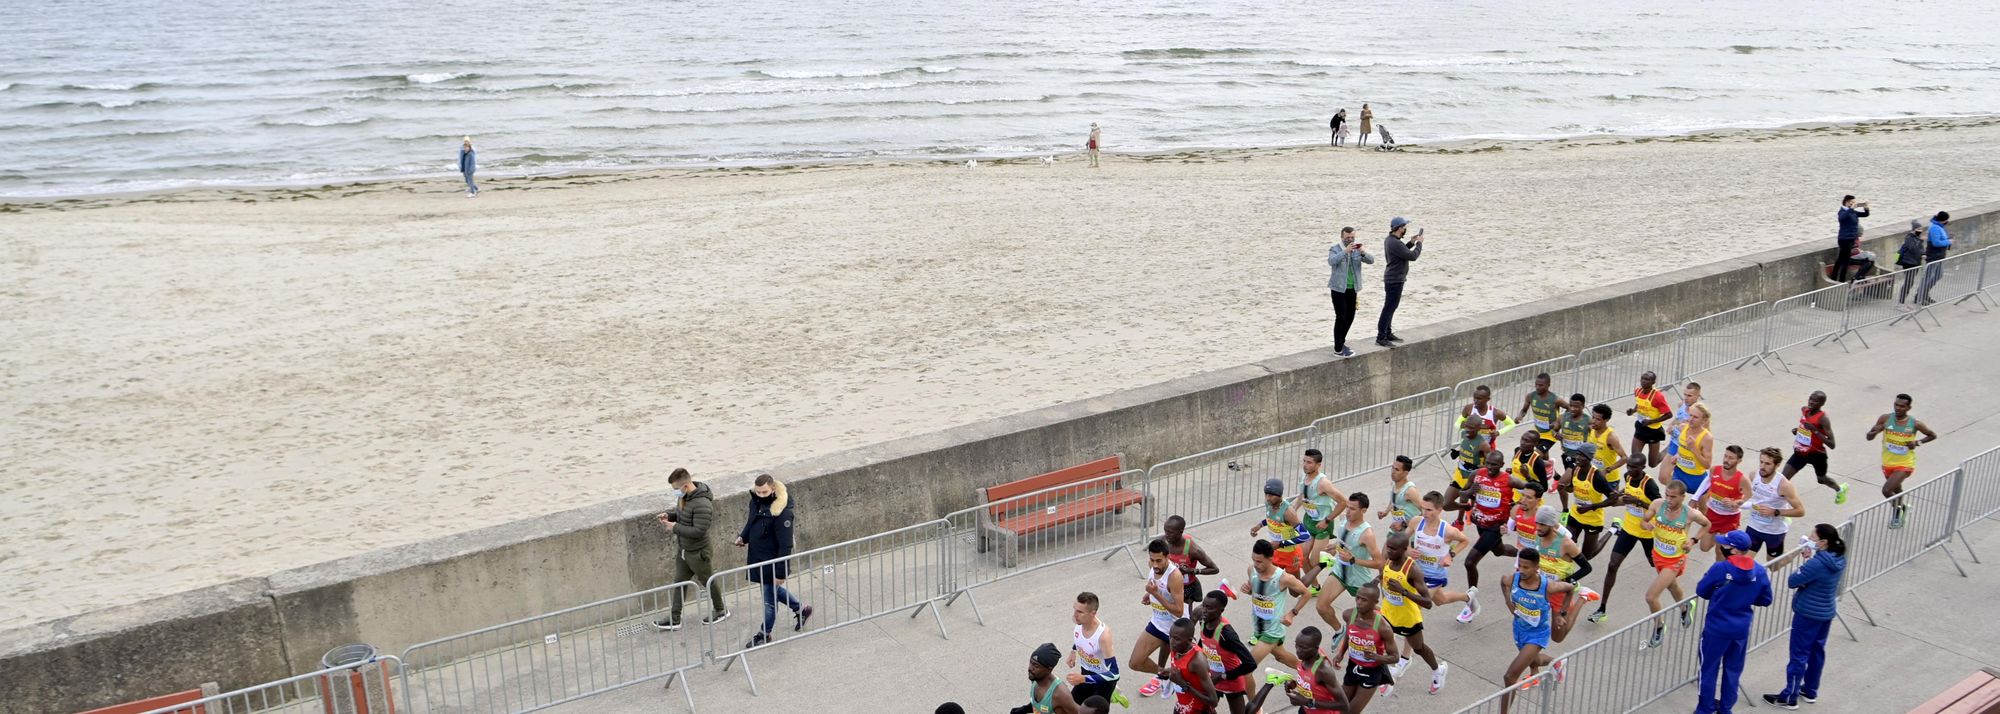 Preliminary analysis of data collected at last weekend’s World Athletics Half Marathon Championships indicates that Gdynia has the best air quality of any major athletics event or road race measured since World Athletics’ Air Quality Project started in 2018.